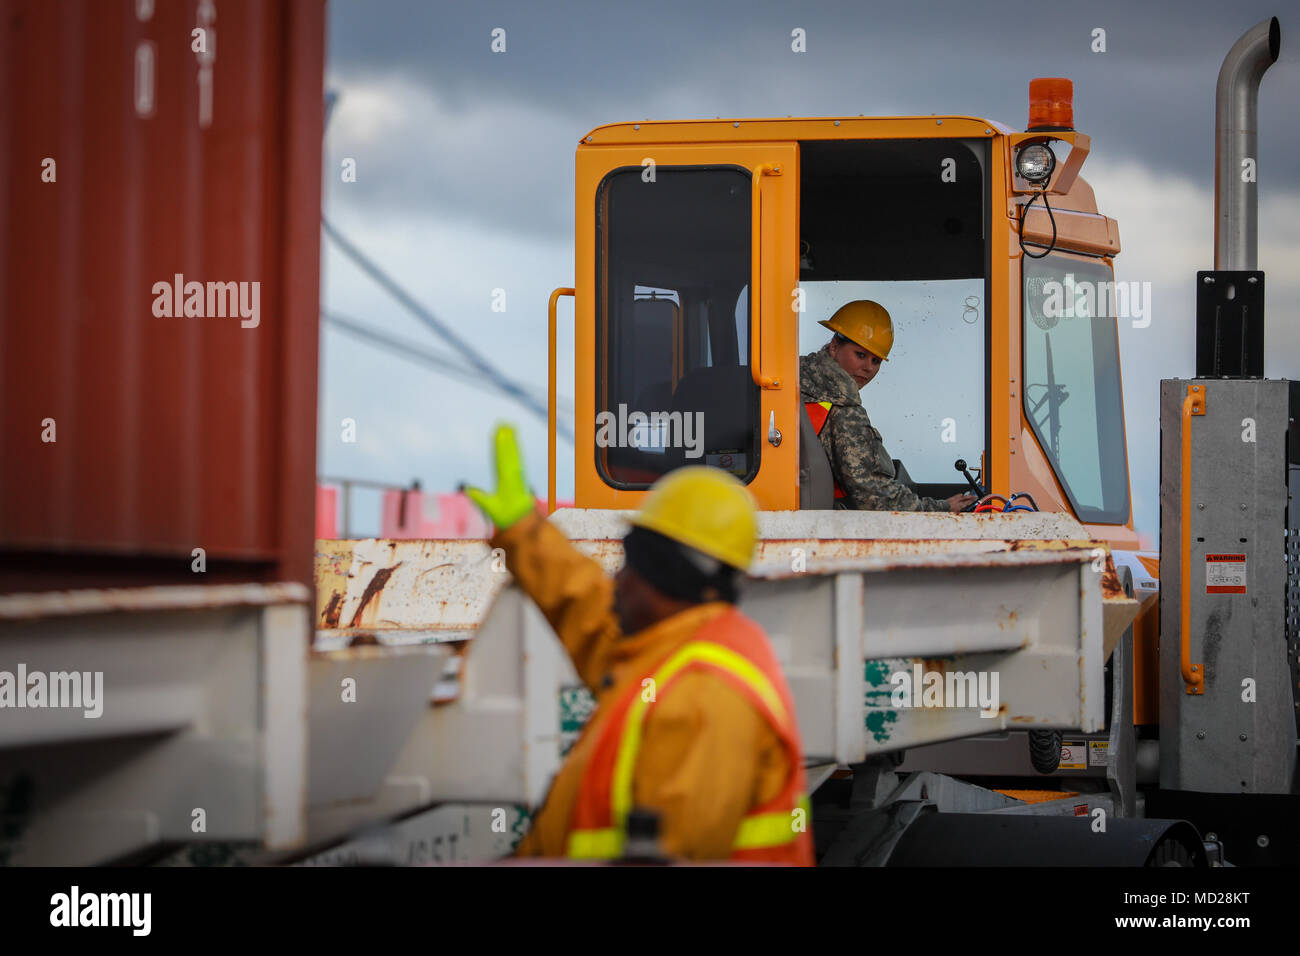 A U.S. Army Reserve Soldier observes the loading of a Twenty-foot equivalent unit container during Operation Trans Mariner 18 West at Military Ocean Terminal Concord, California, Mar. 2, 2018. Trans Mariner 18 West is a real-world strategic mission utilizing U.S. Army Reserve, National Guard and Active component Soldiers to conduct Port Operations allowing Army materiel and munitions containers for travel onward.    (U.S. Army photo by Sgt. Eben Boothby) Stock Photo